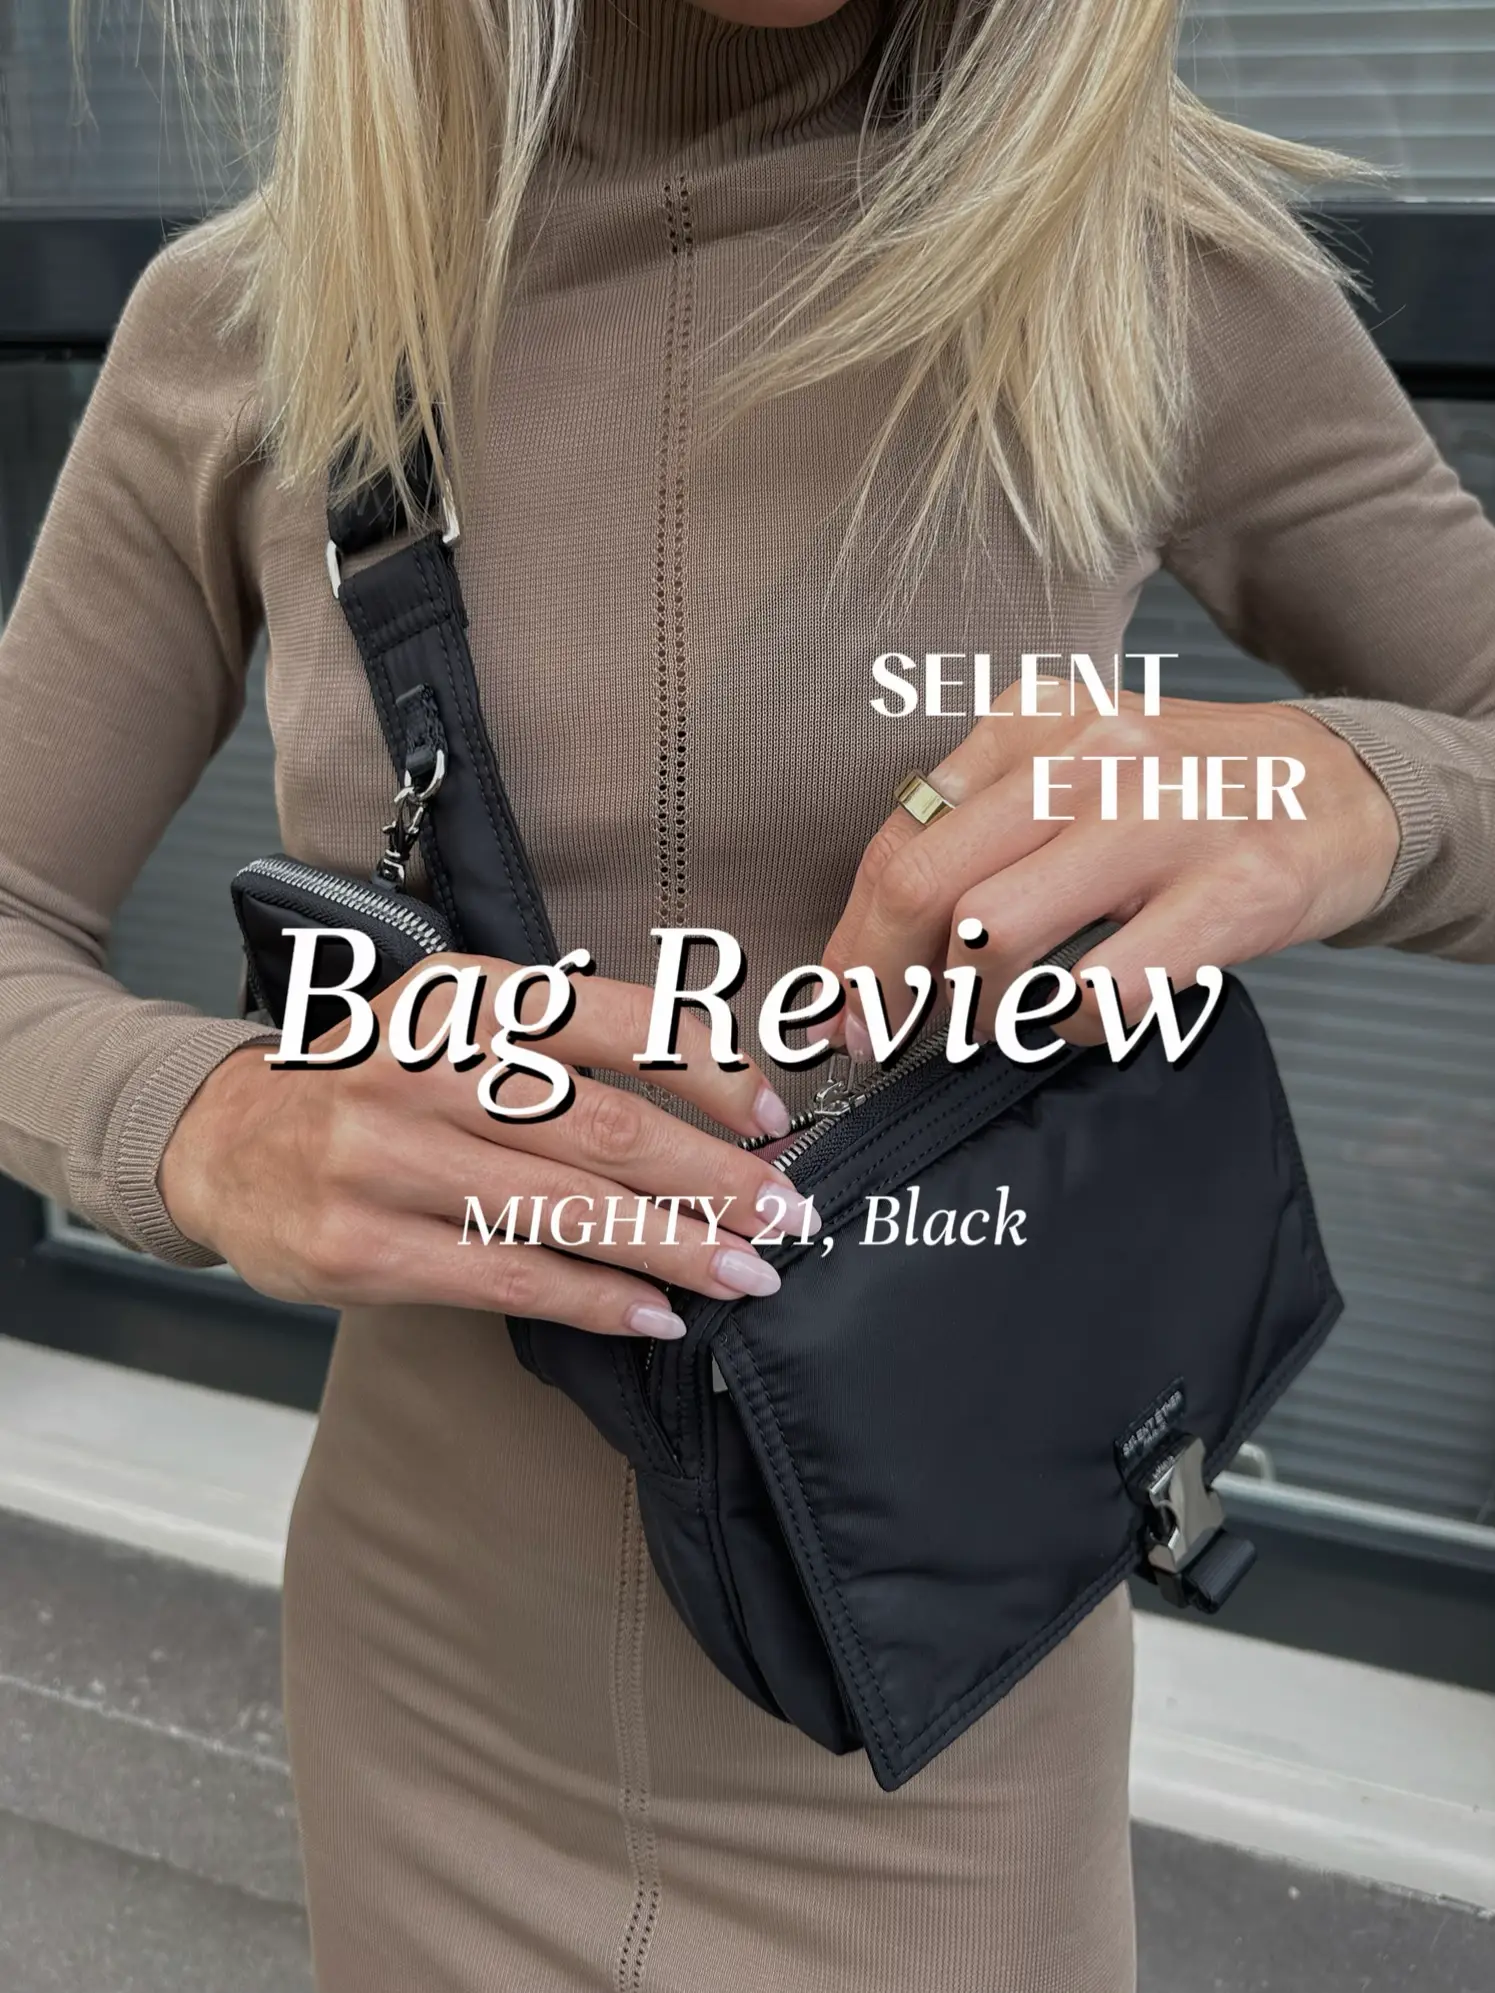 SELENT ETHER Bag Review - Mighty 21, Black | Gallery posted by